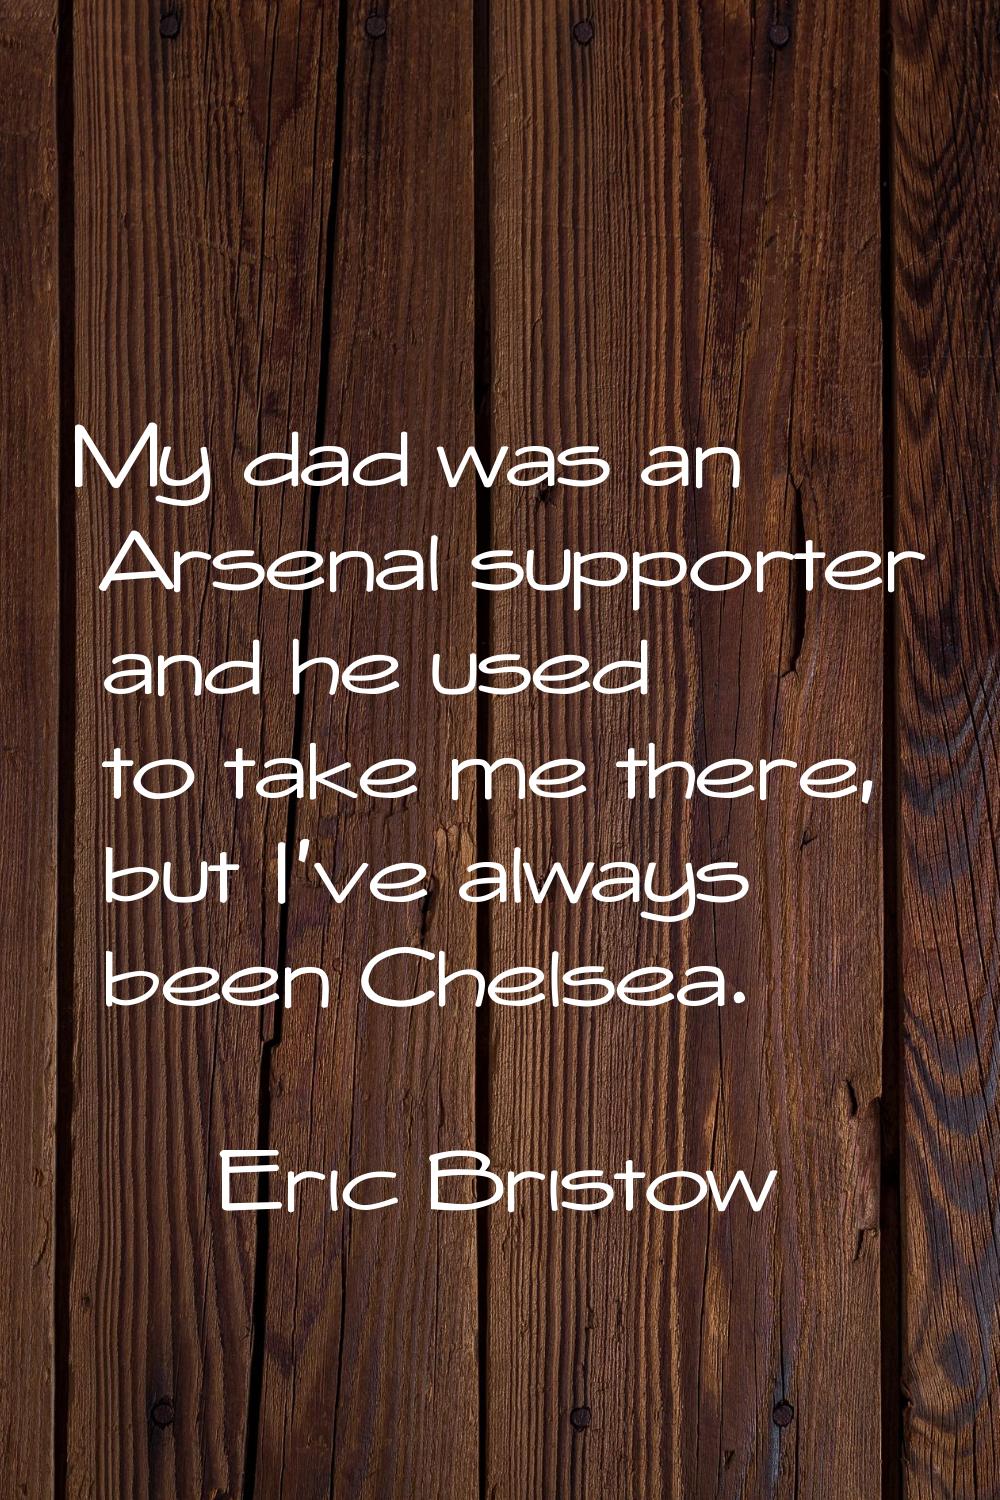 My dad was an Arsenal supporter and he used to take me there, but I've always been Chelsea.